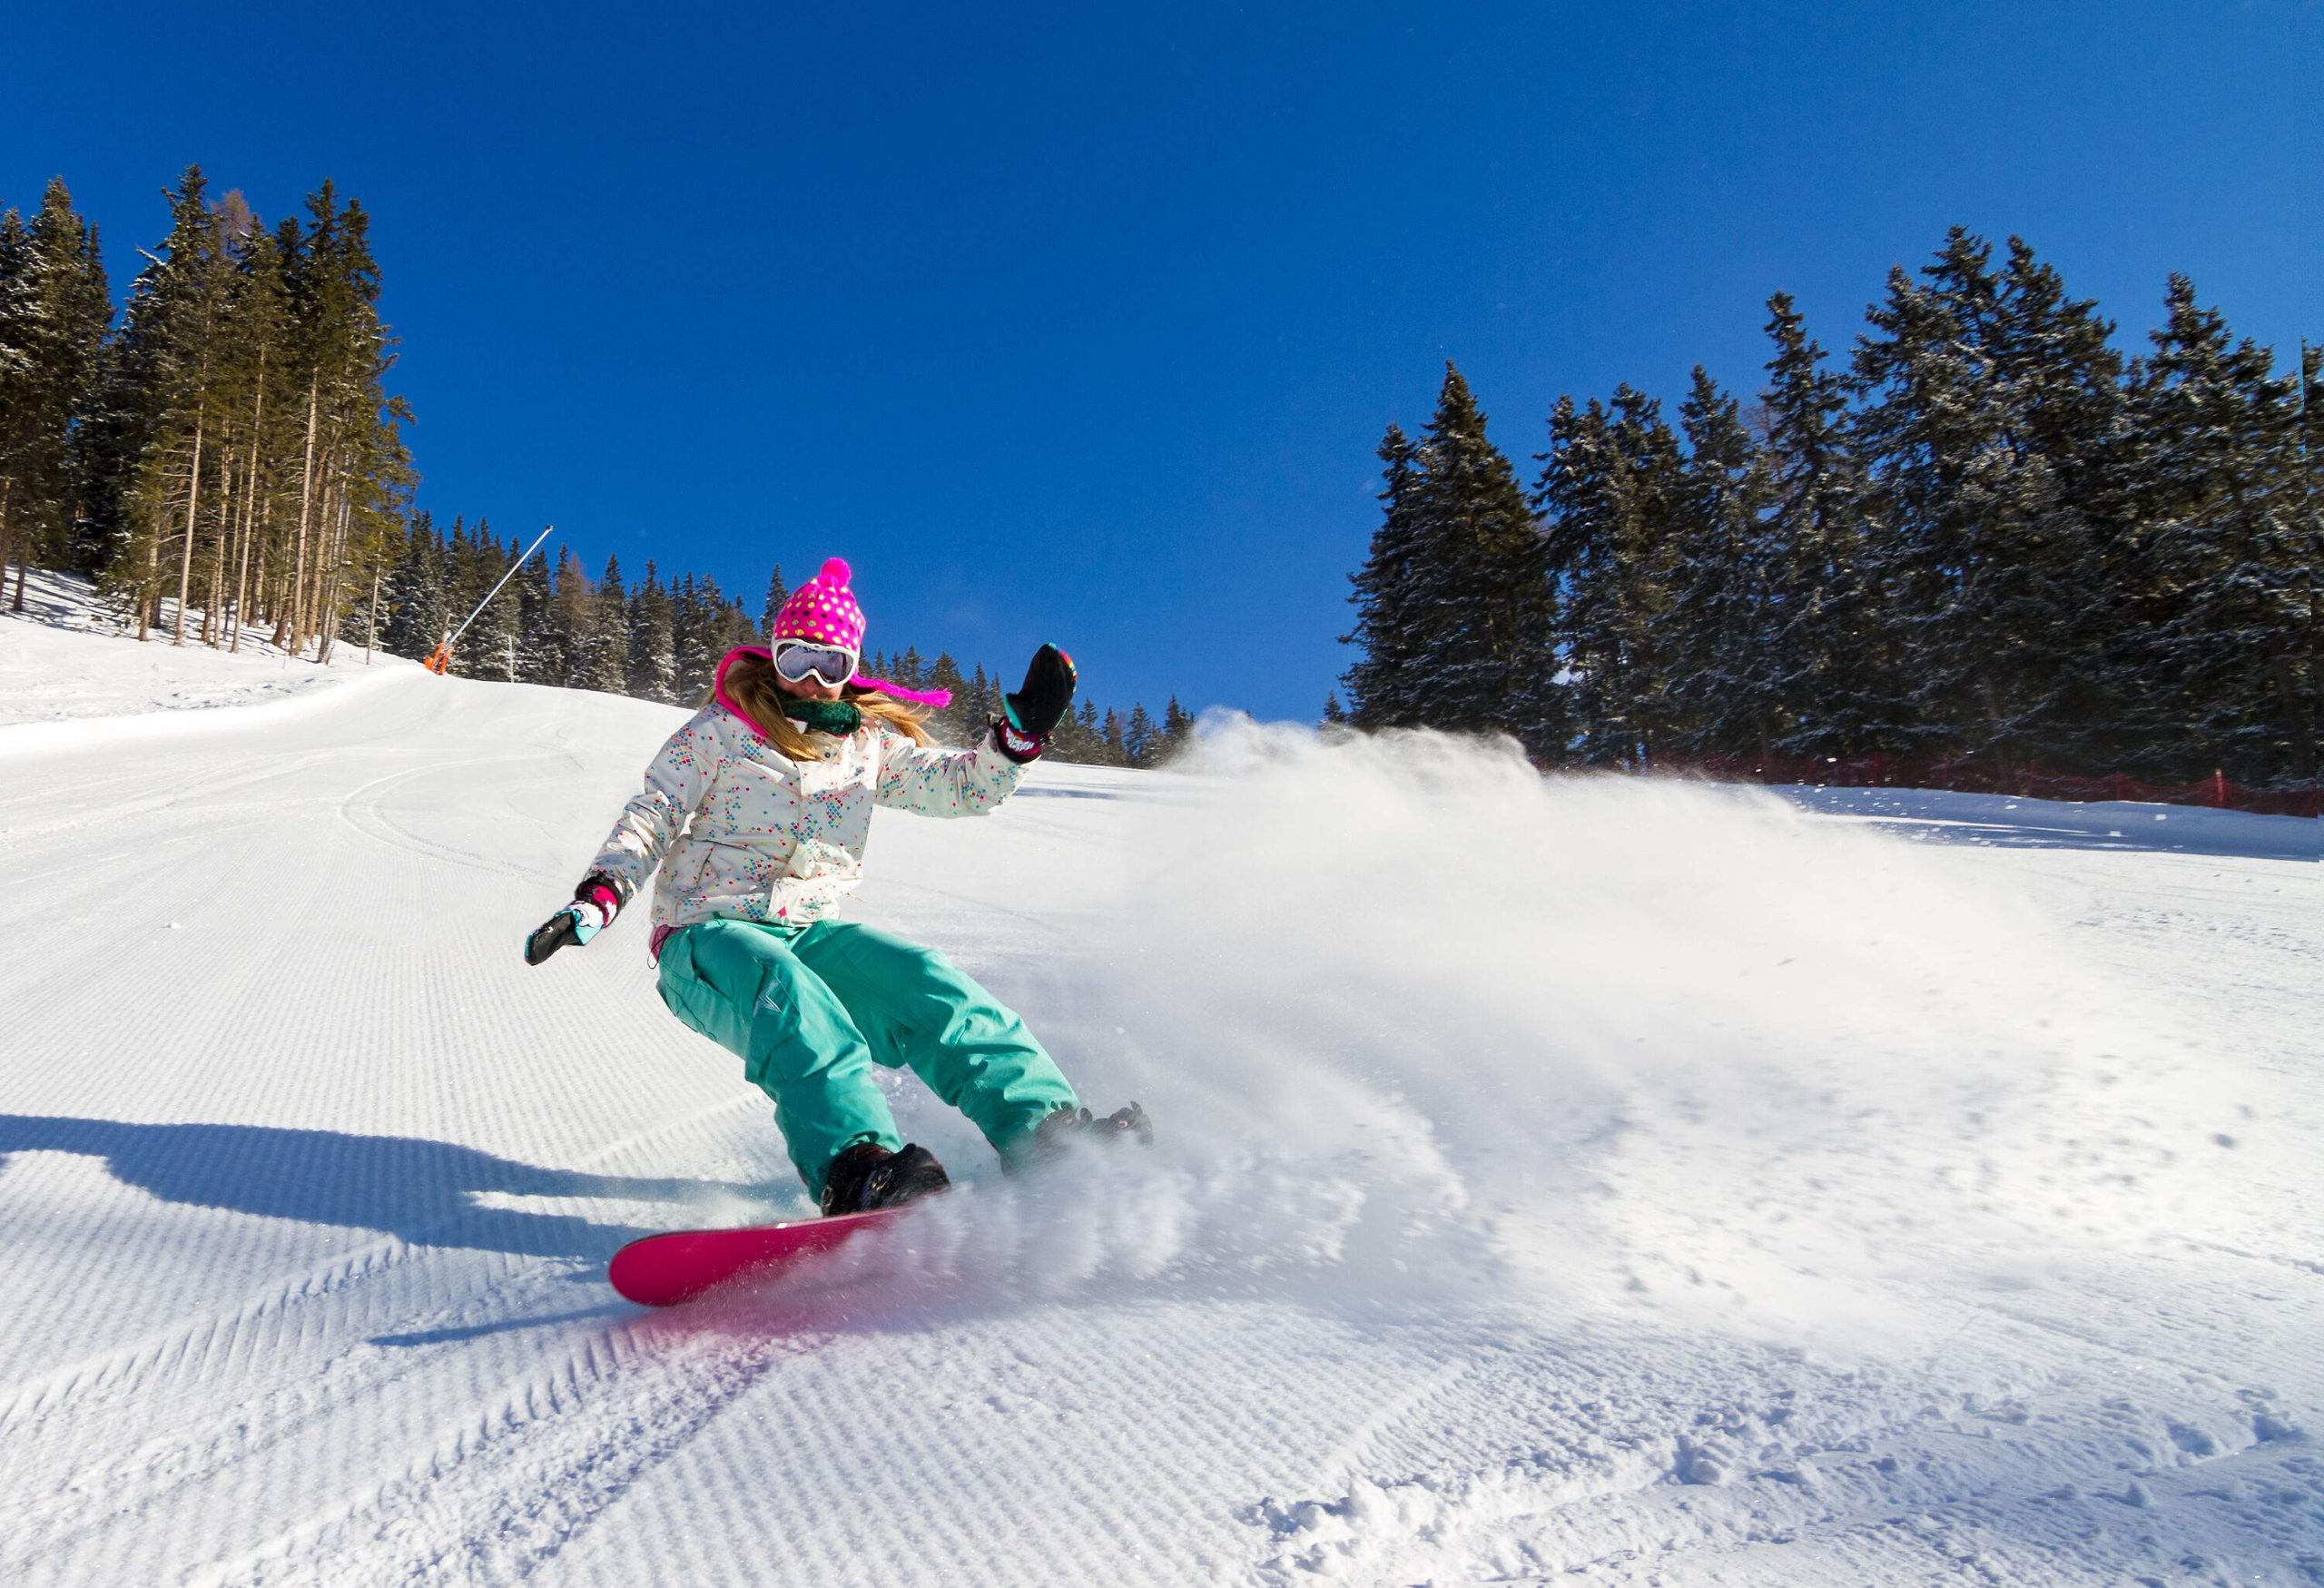 A woman on a pink snowboard making a skidded turn on a well-groomed slope.